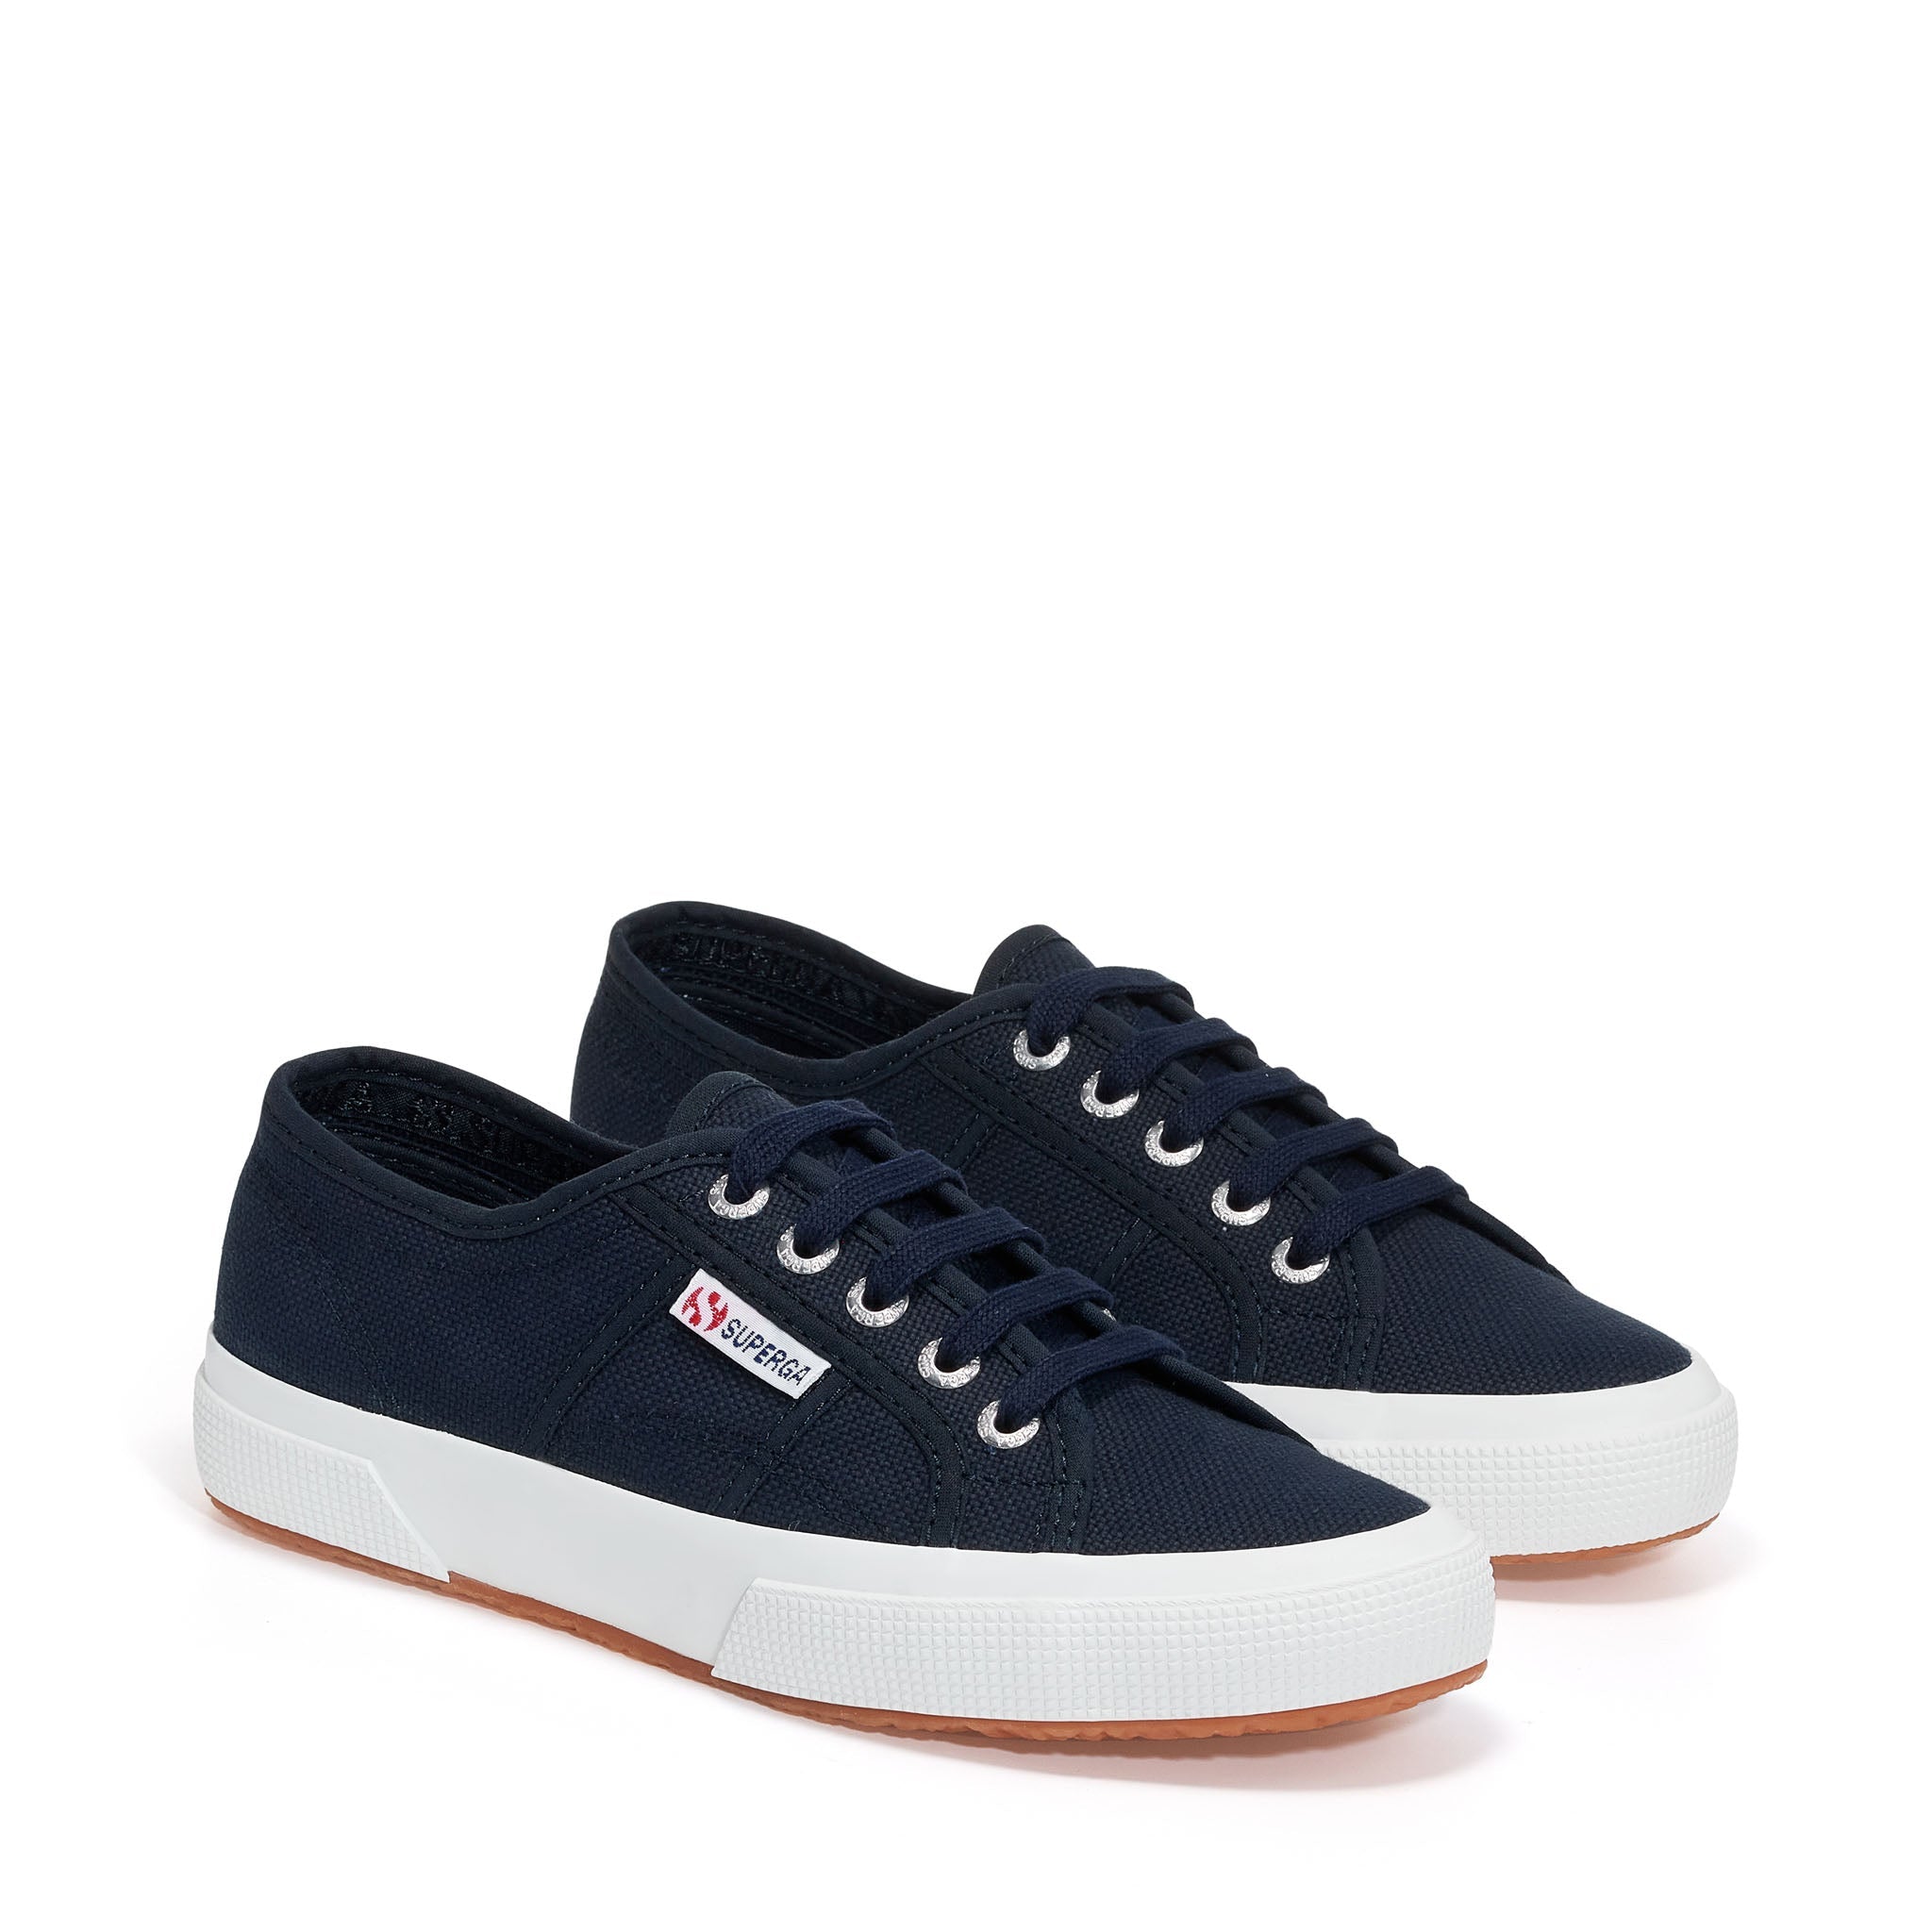 2750 Cotu Classic Sneakers - Navy White